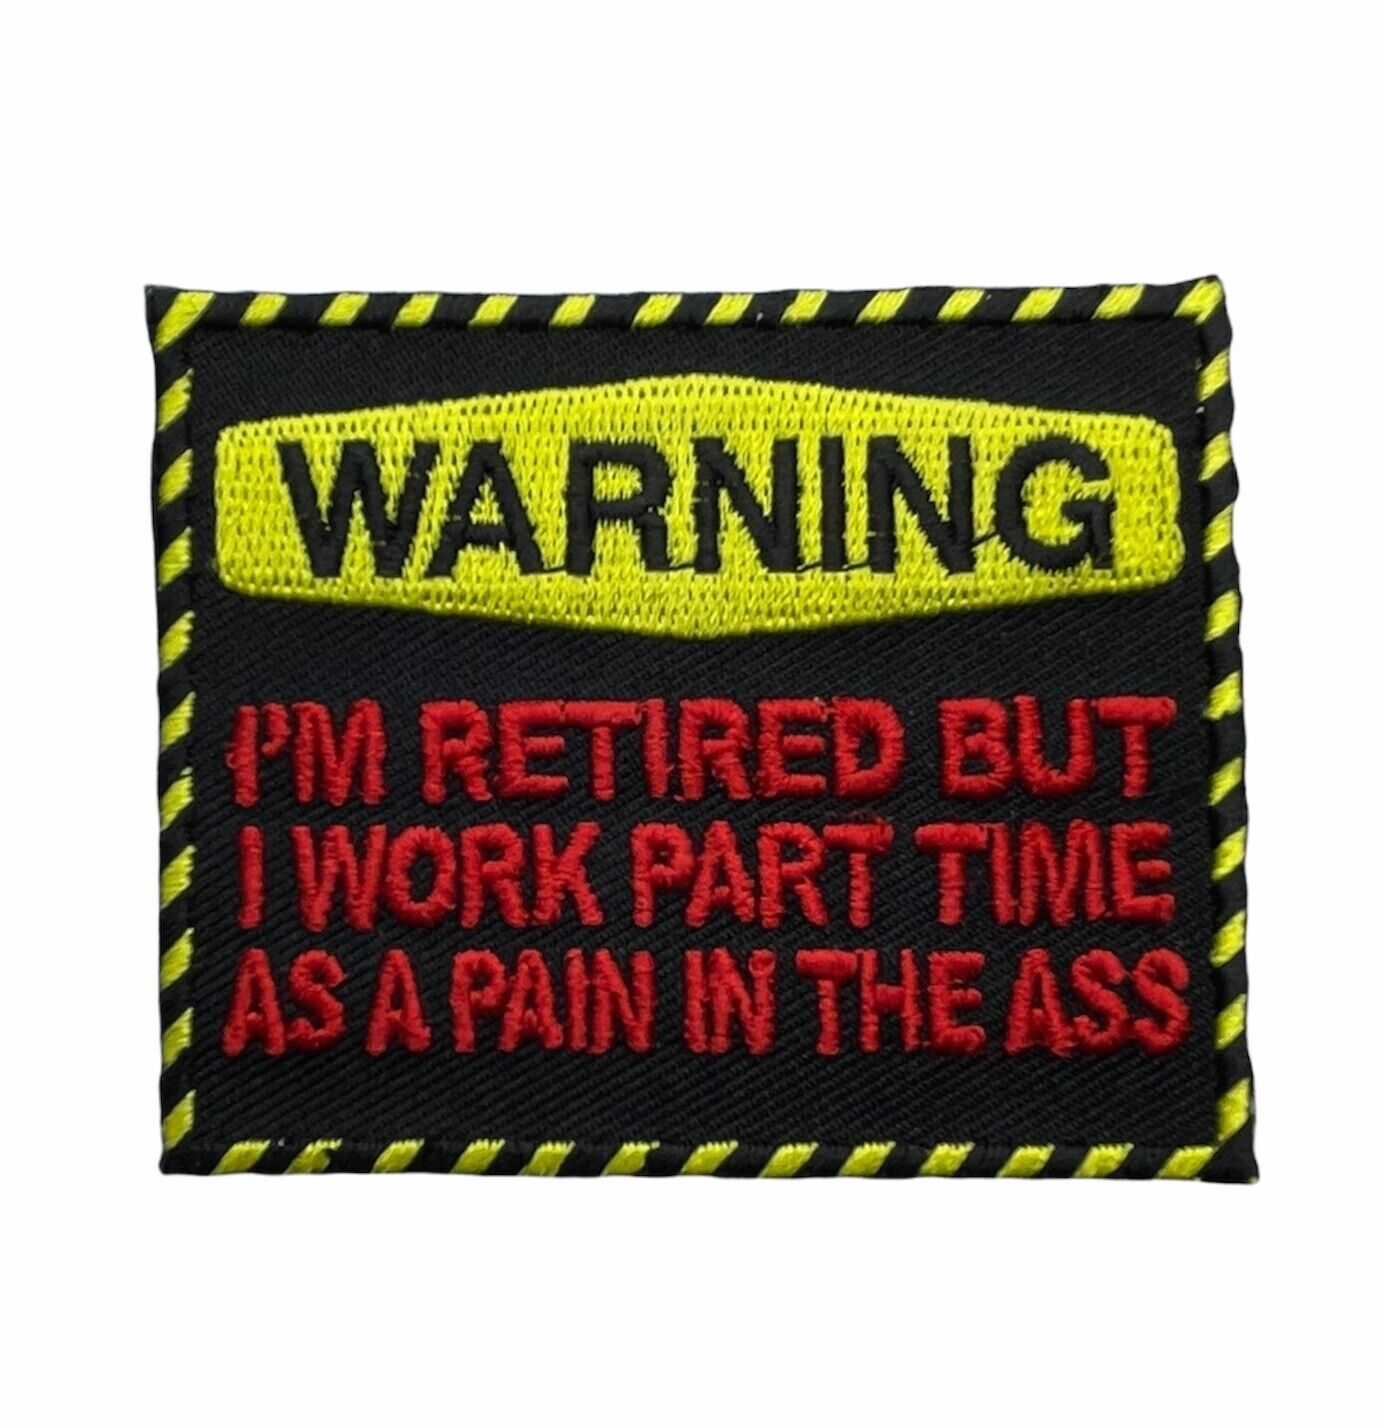 Warning I'm Retired But I Work Part Time embroidered Patch IV2908 F5D27D